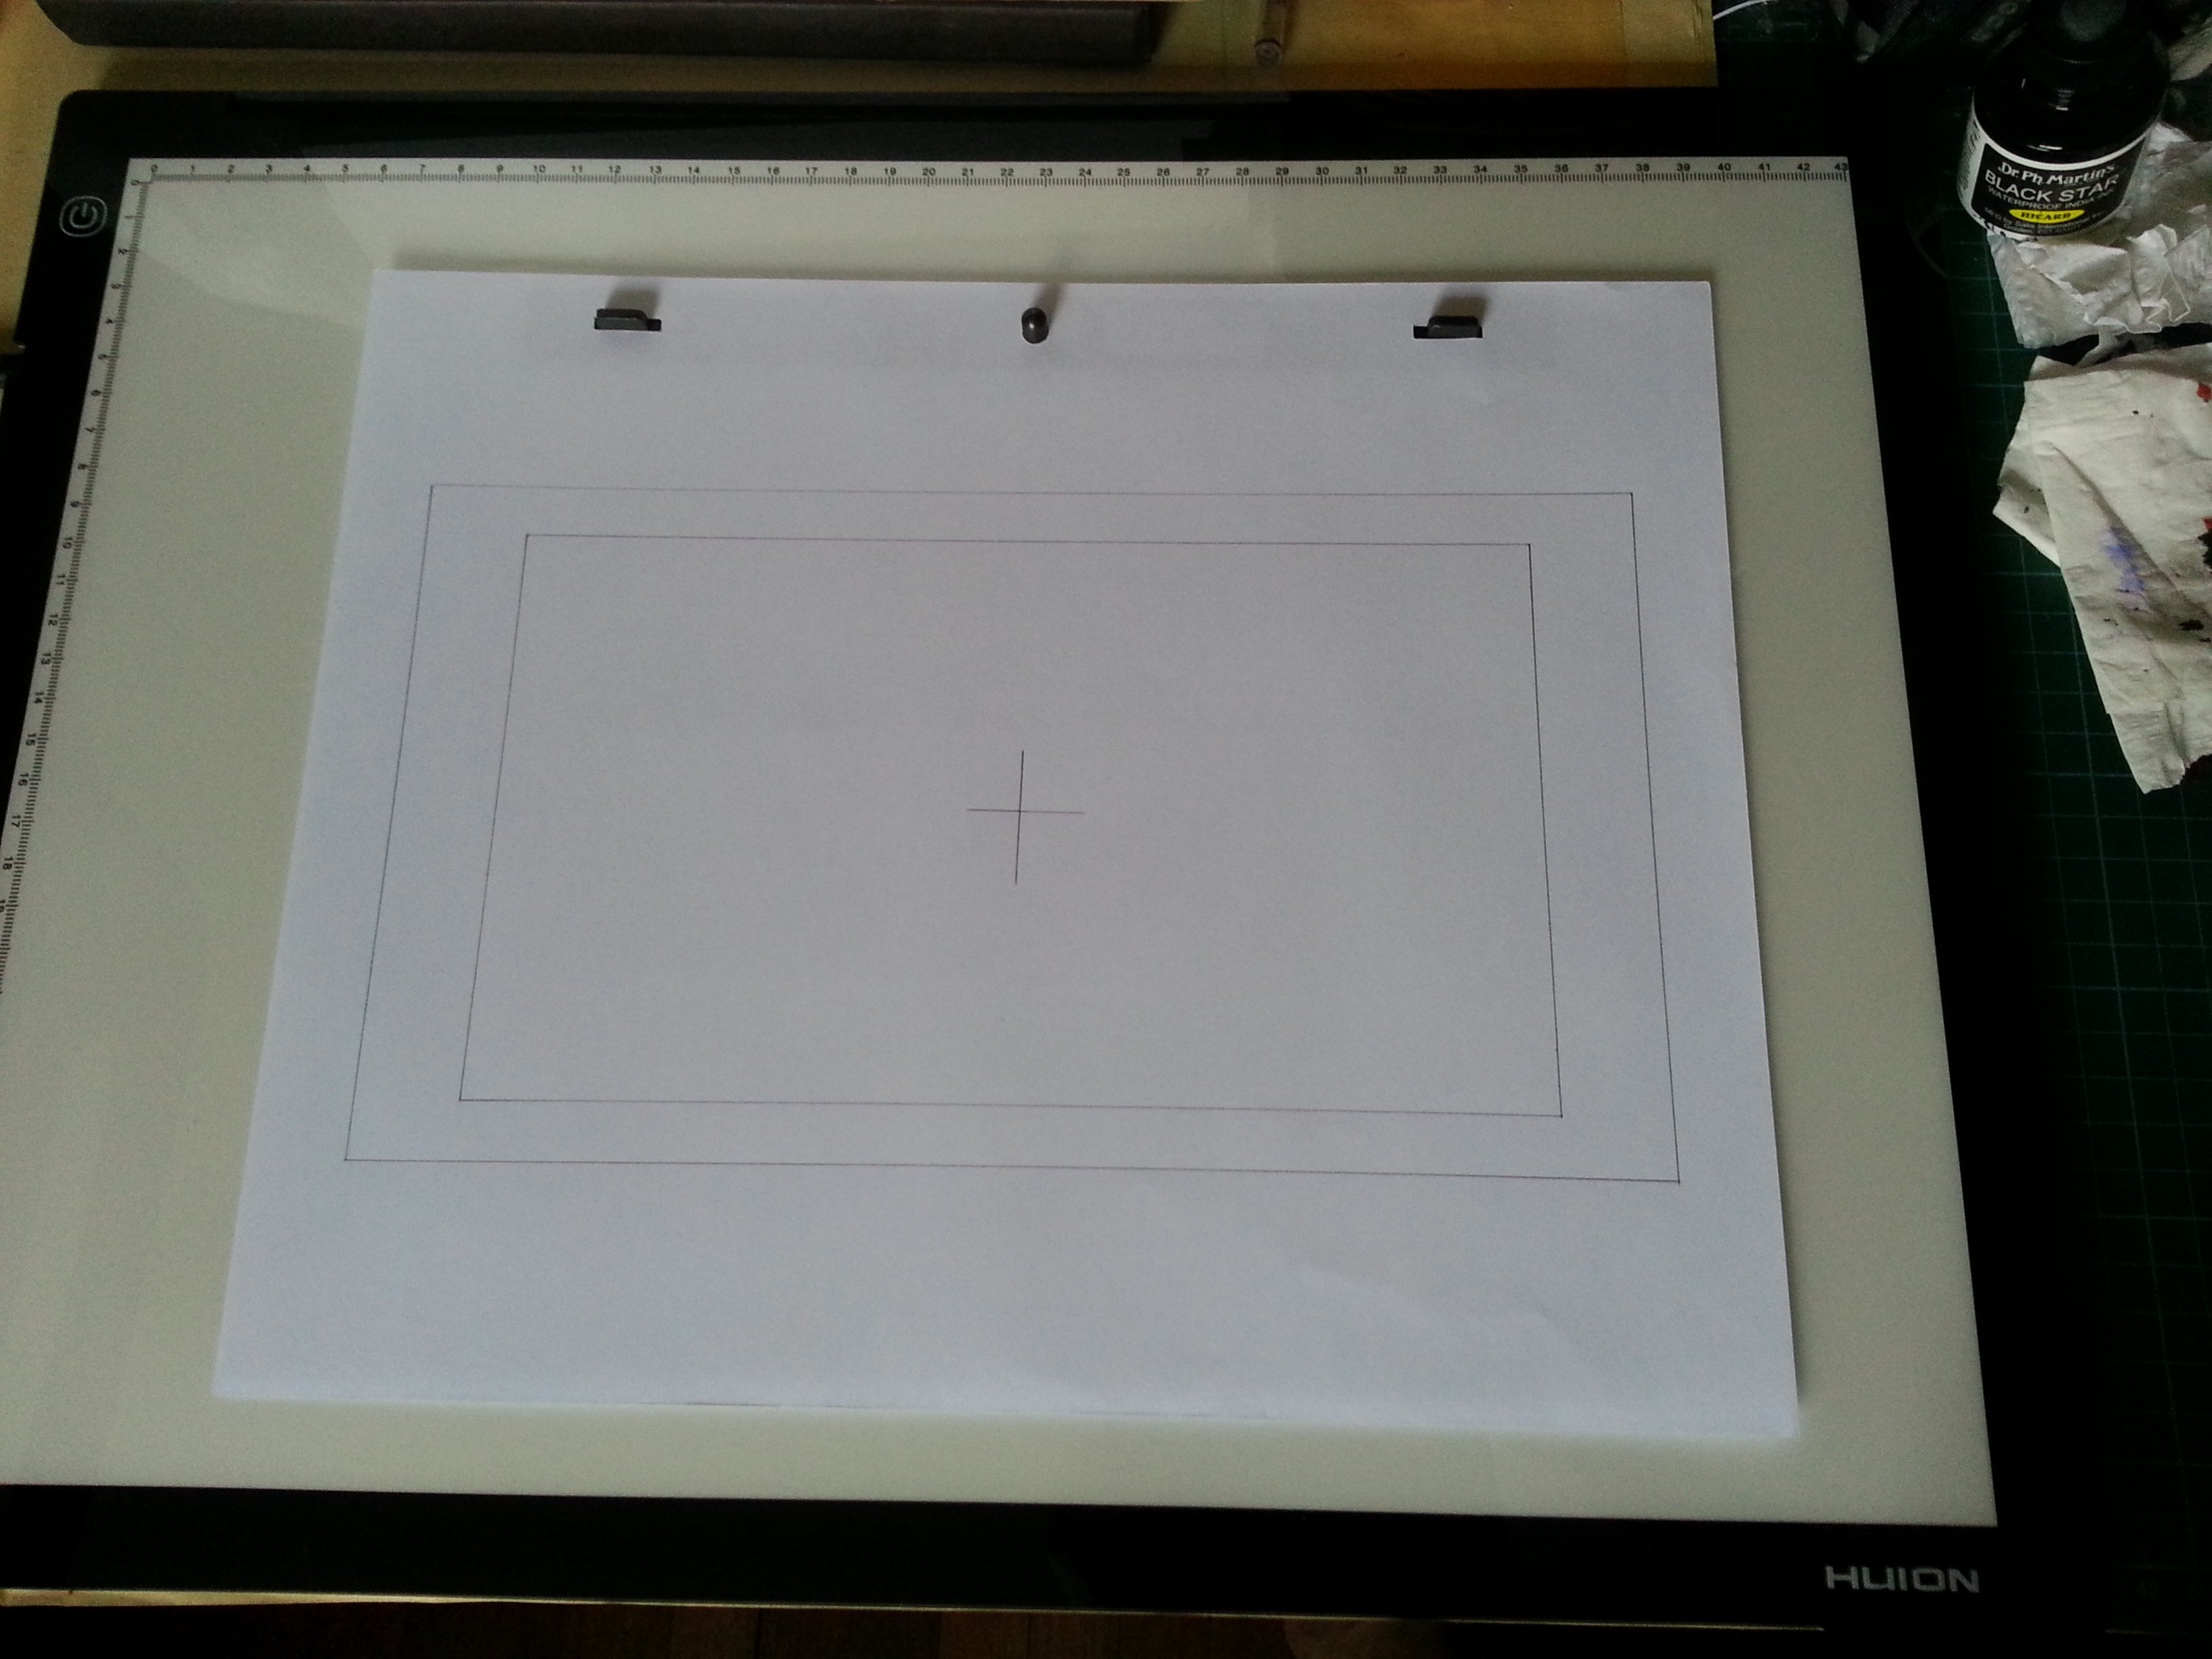 Yongcheng on X: Finally! My small set up for animation. A3 Huion light box  with a metal peg bar. Hoping to do some random animation.   / X